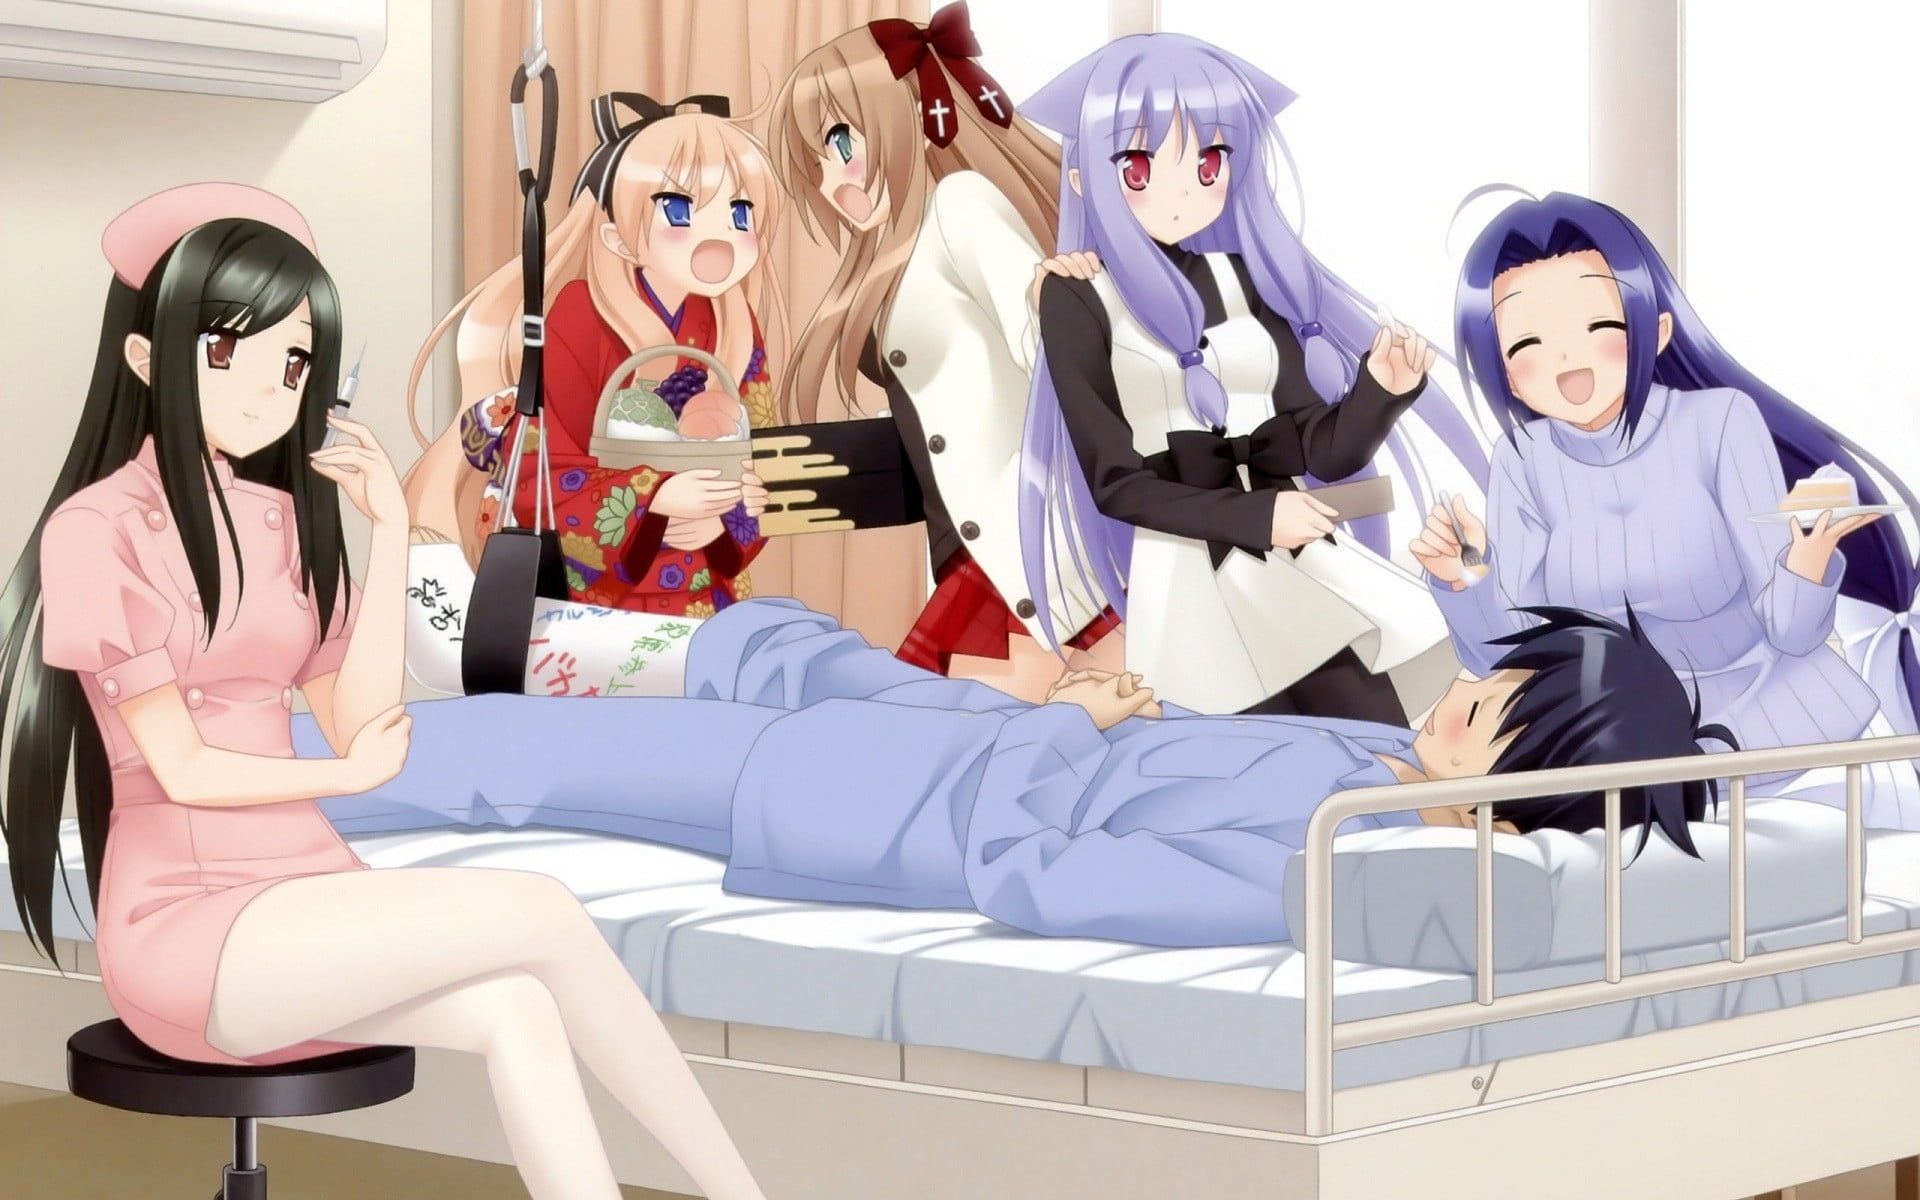 Five women in clothing in front of man lying on bed anime